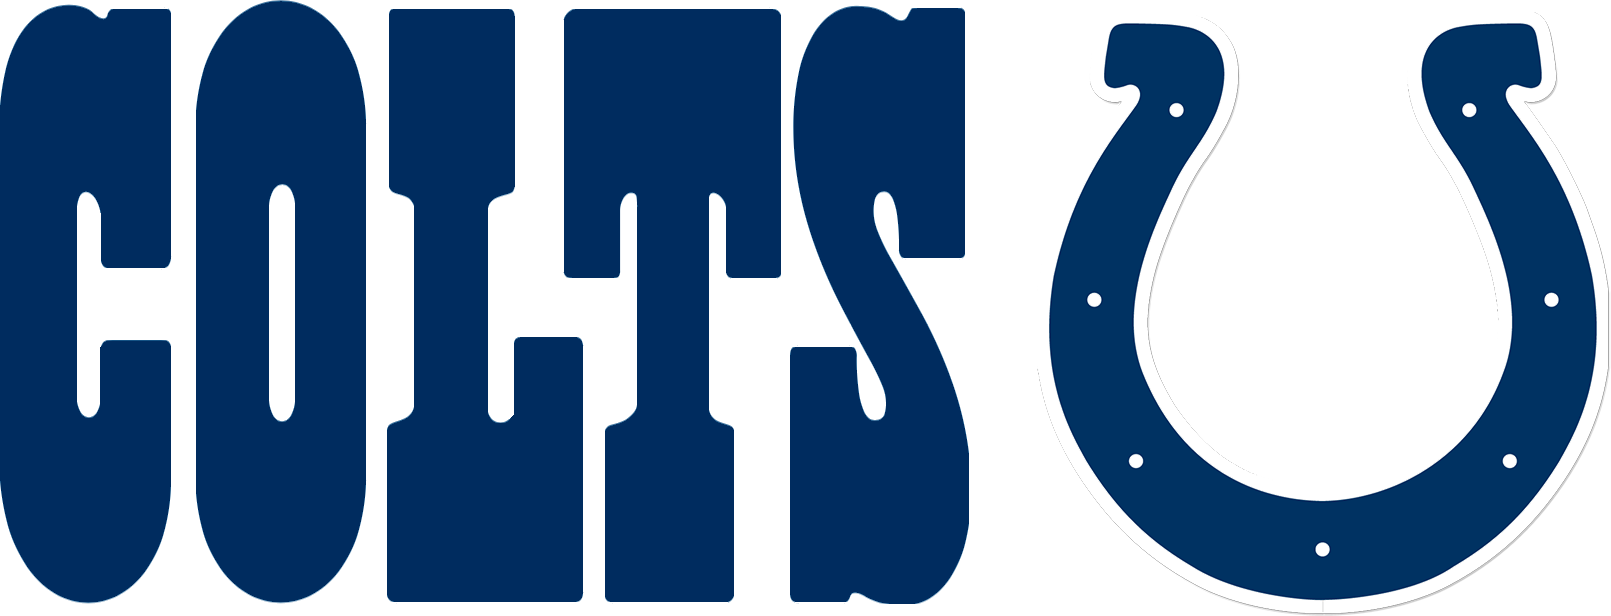 Thanks To The 2017 Presenting Sponsor, The Indianapolis - Indianapolis Colts Logo Vector (1611x616)